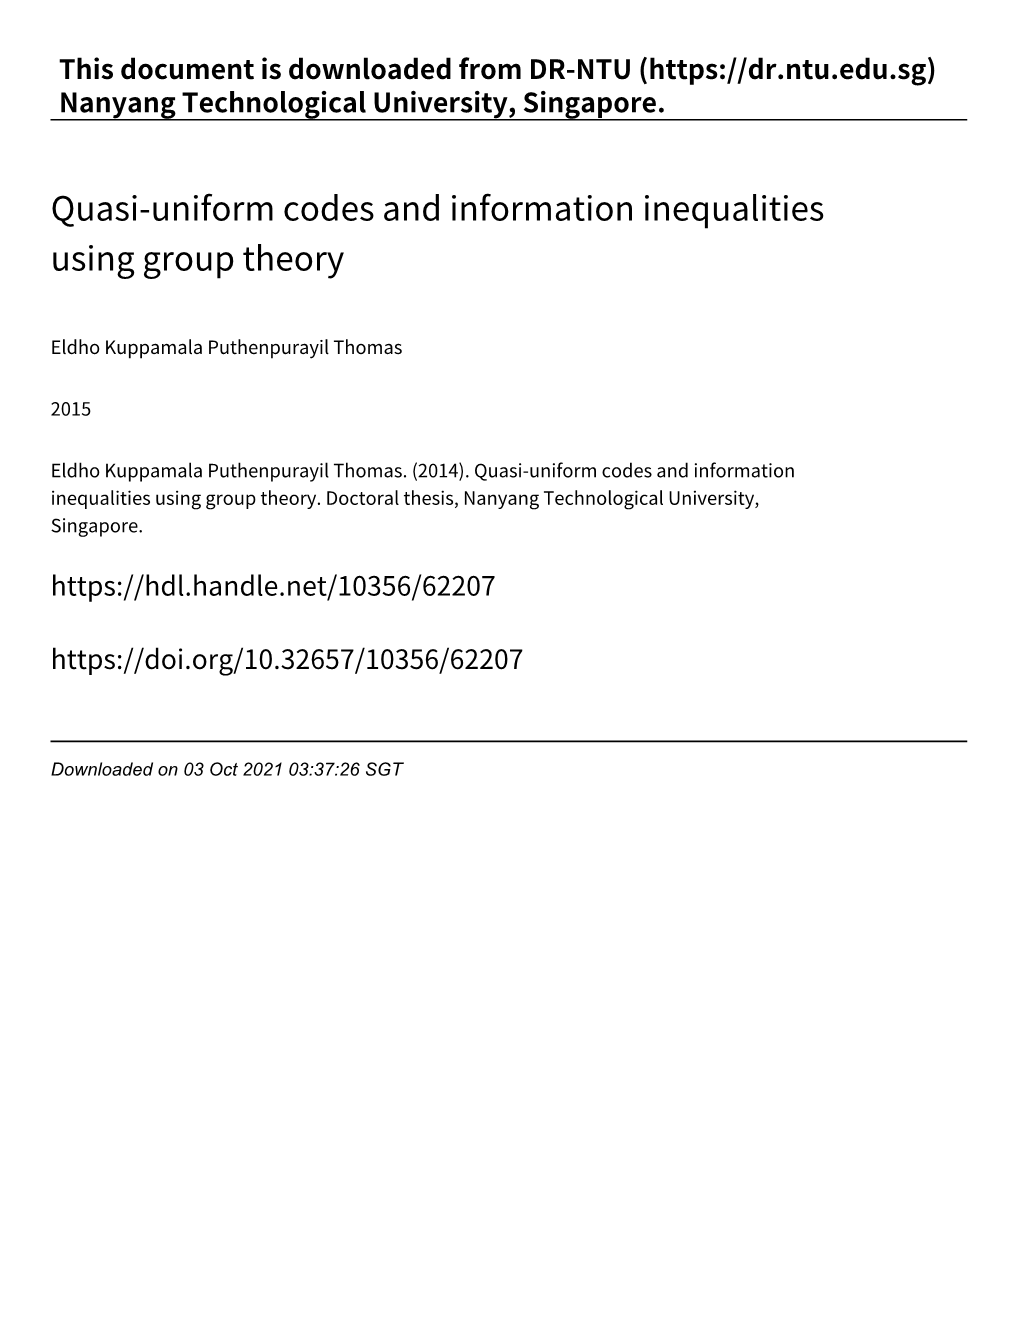 Quasi‑Uniform Codes and Information Inequalities Using Group Theory